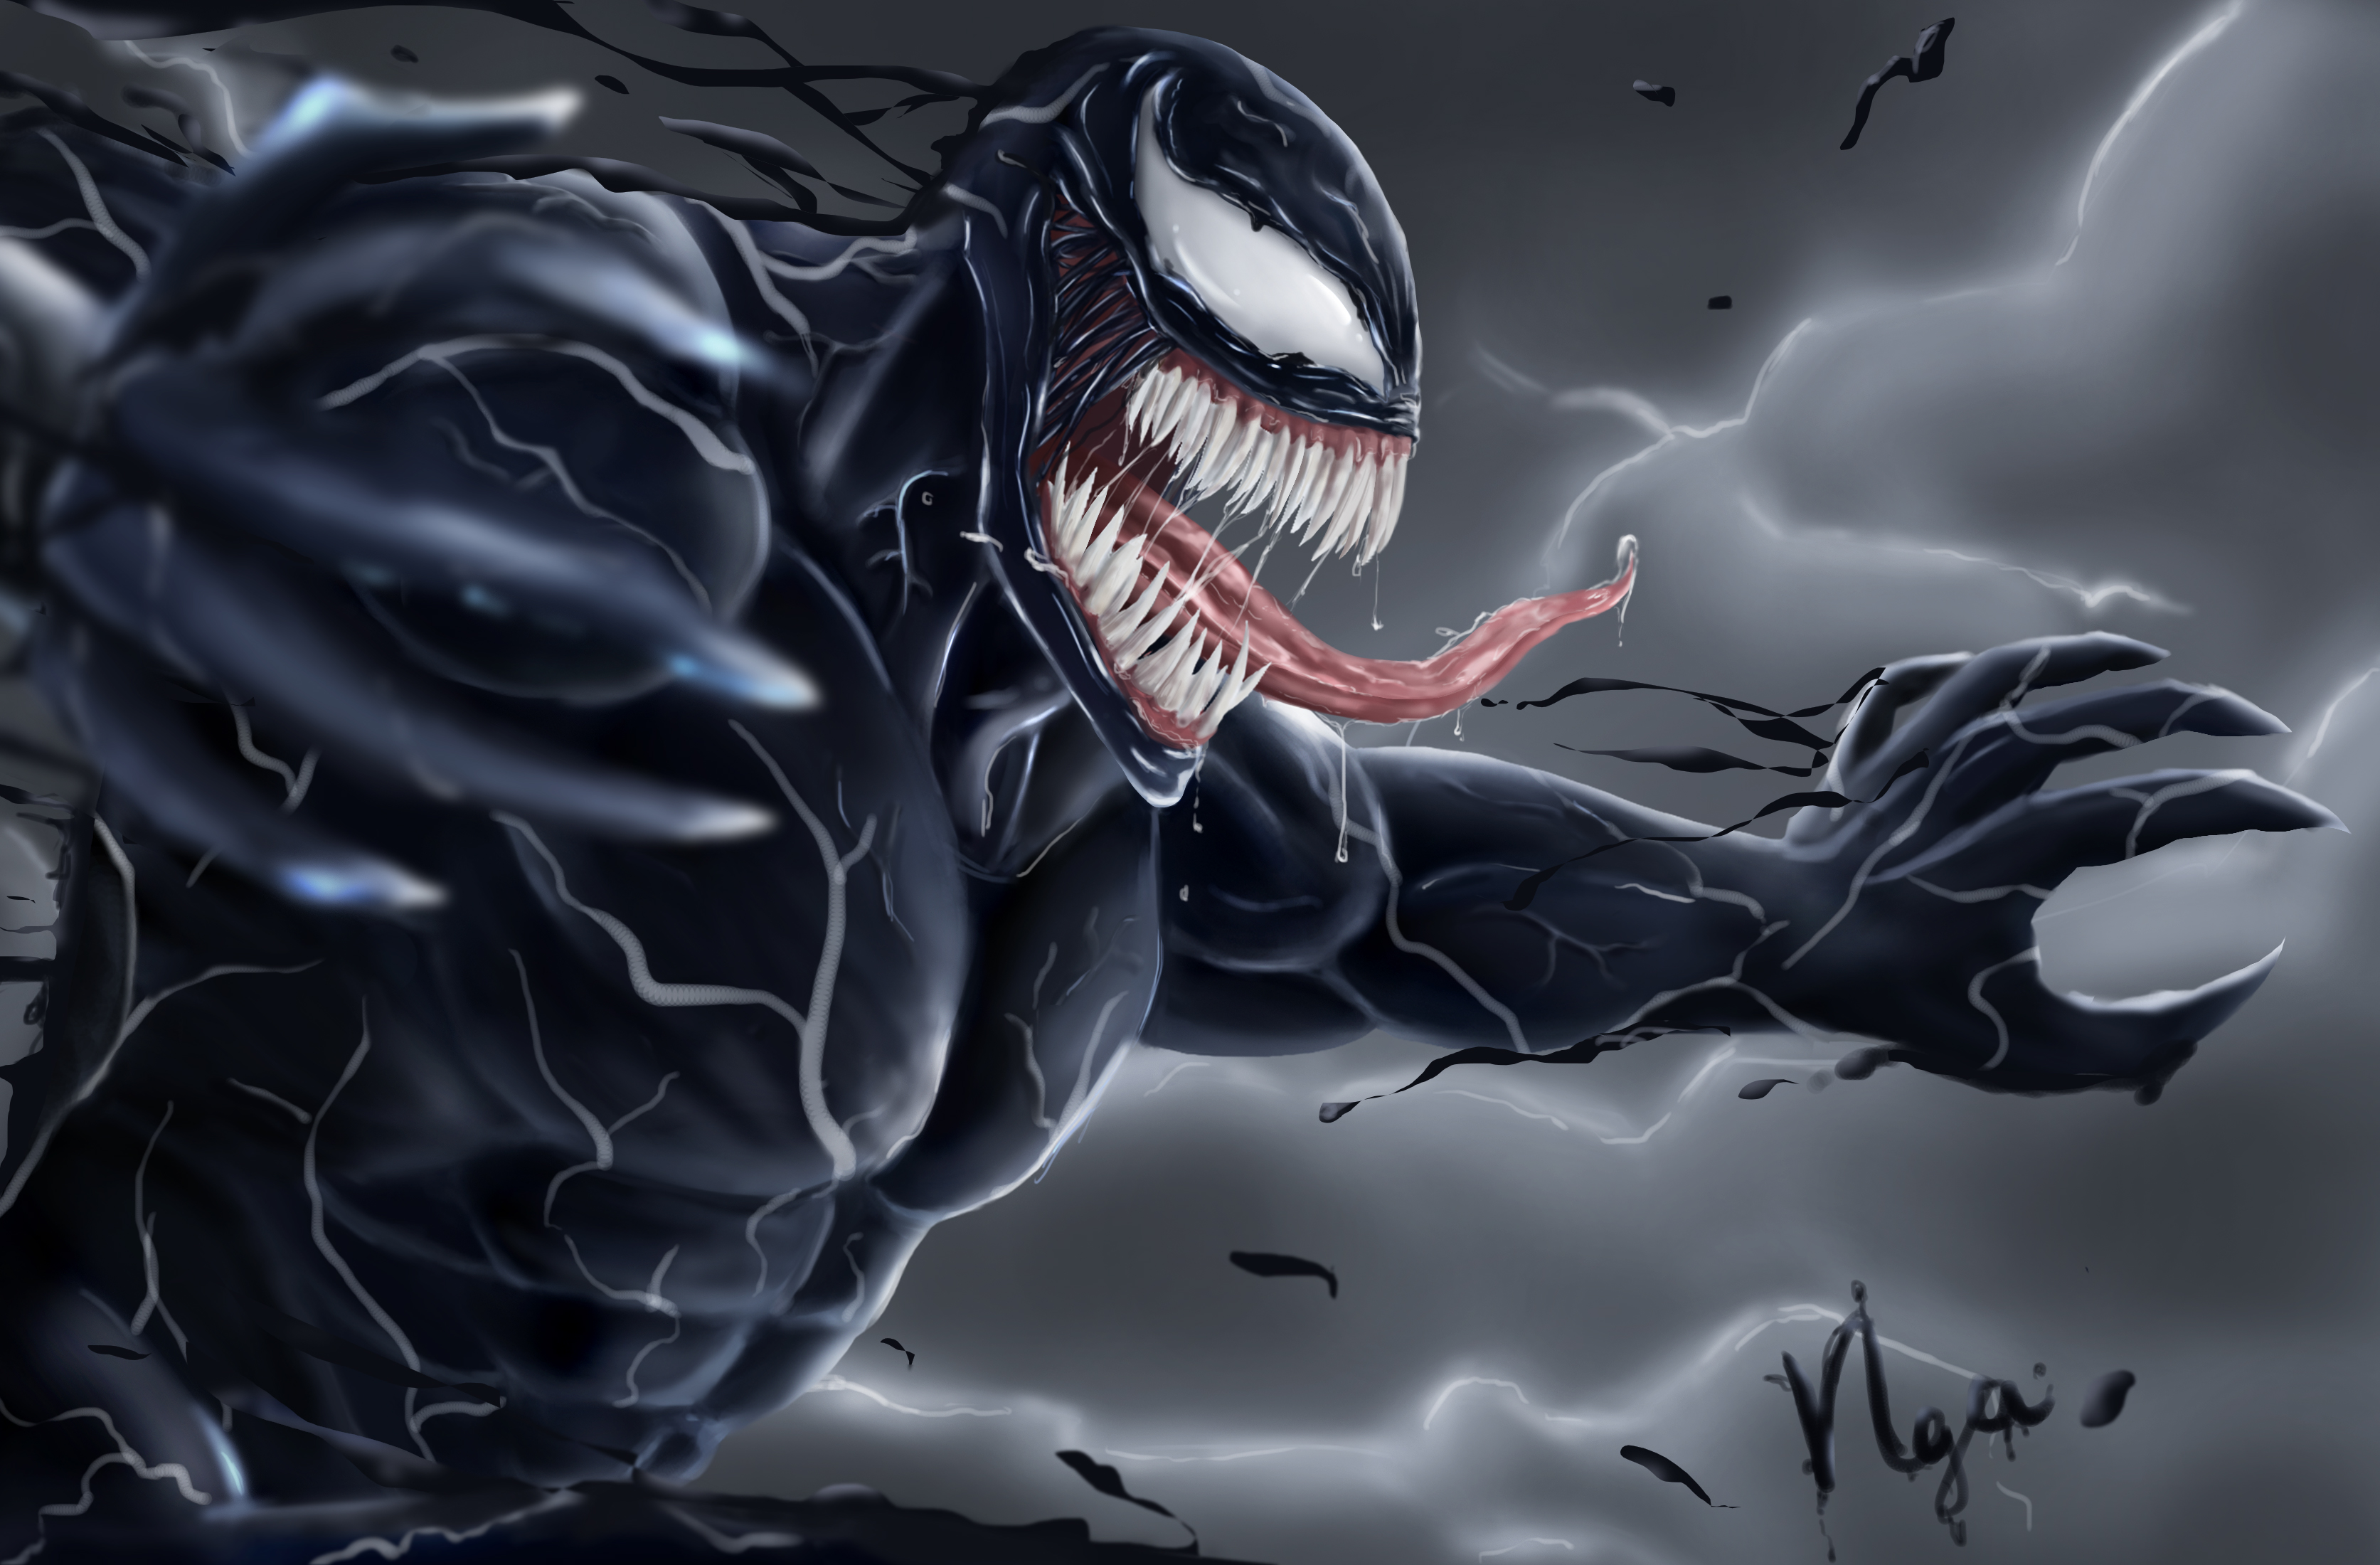 download the new version for ios Venom